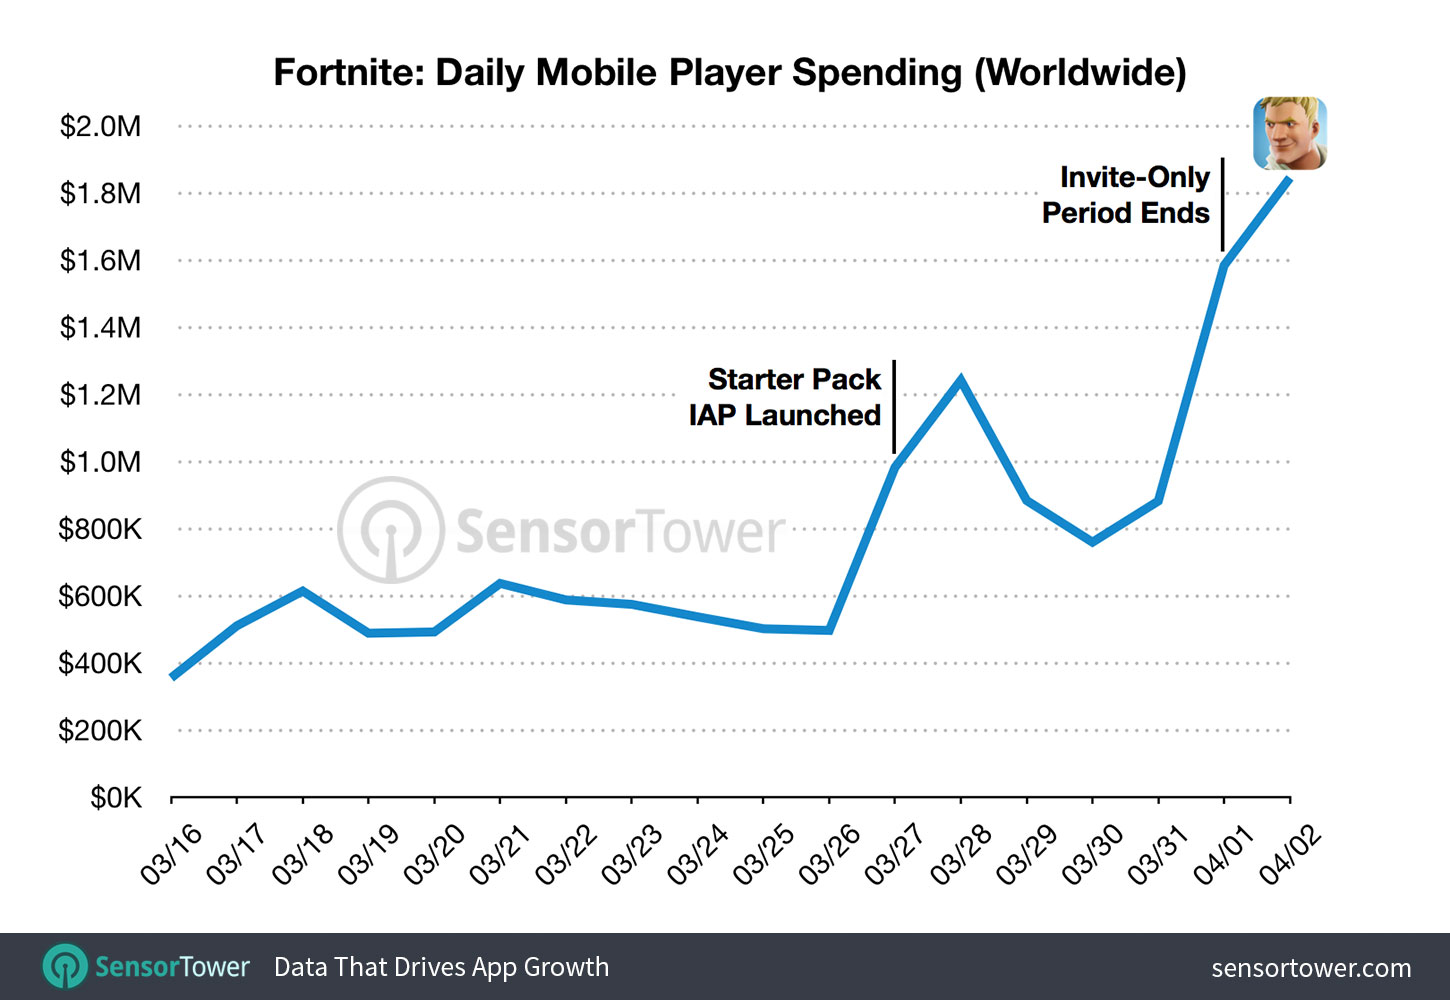 Fortnite Is The Top Grossing App And Keeps Making More Money On - the starter pack iap also helped cause a spike in revenue while there was a dip in revenue it helped kickstart fortnite s revenue growth